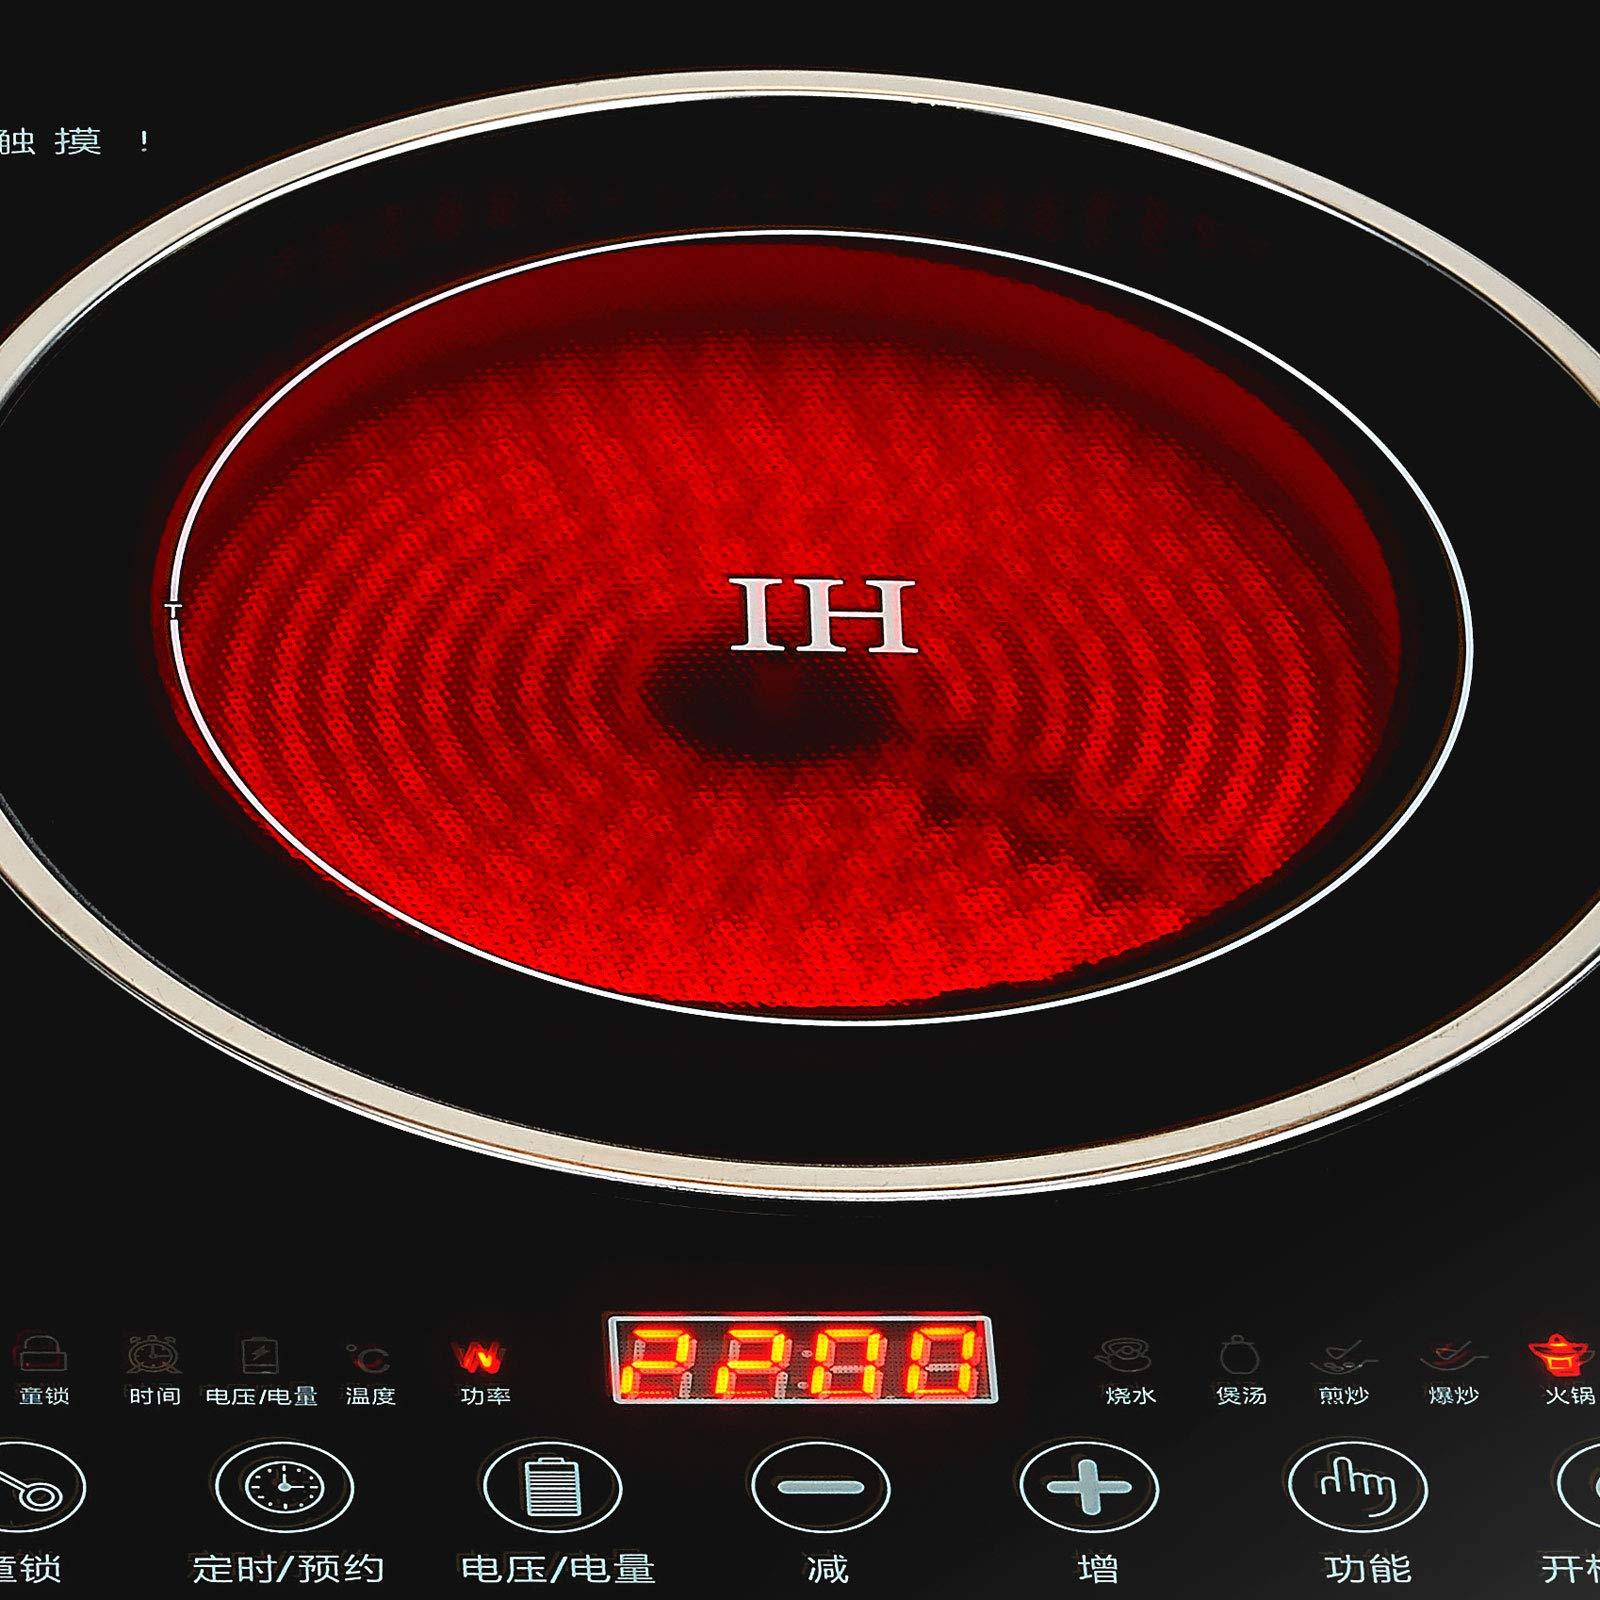 Electric Double Induction Cooktop,110V LCD Display Induction Hot Plate